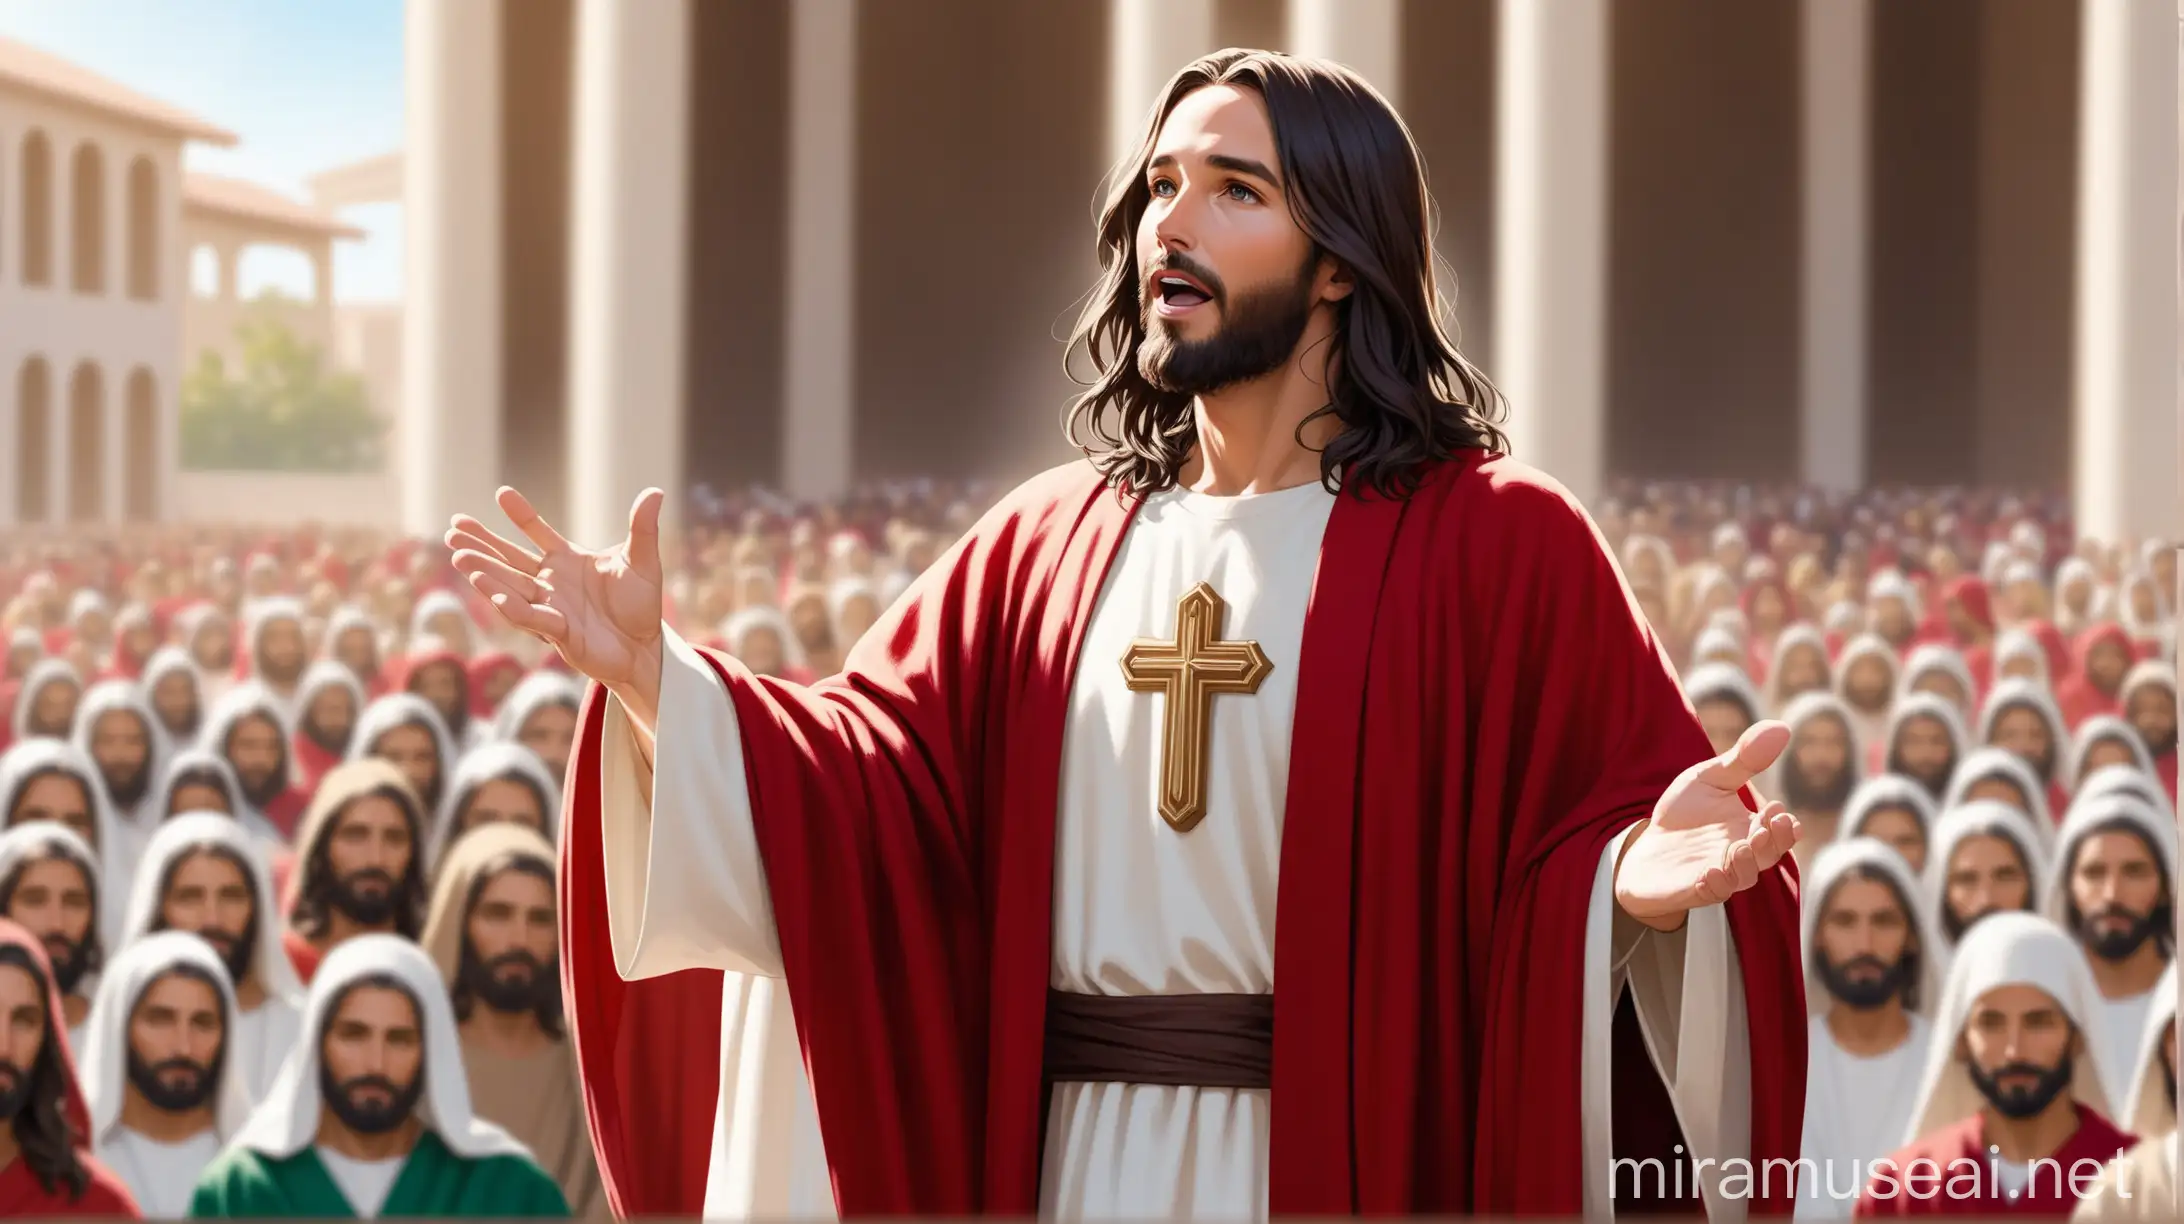 Sigma Jesus Christ speaking to the public, focus on Jesus, very detailed, he's wearing a red robe